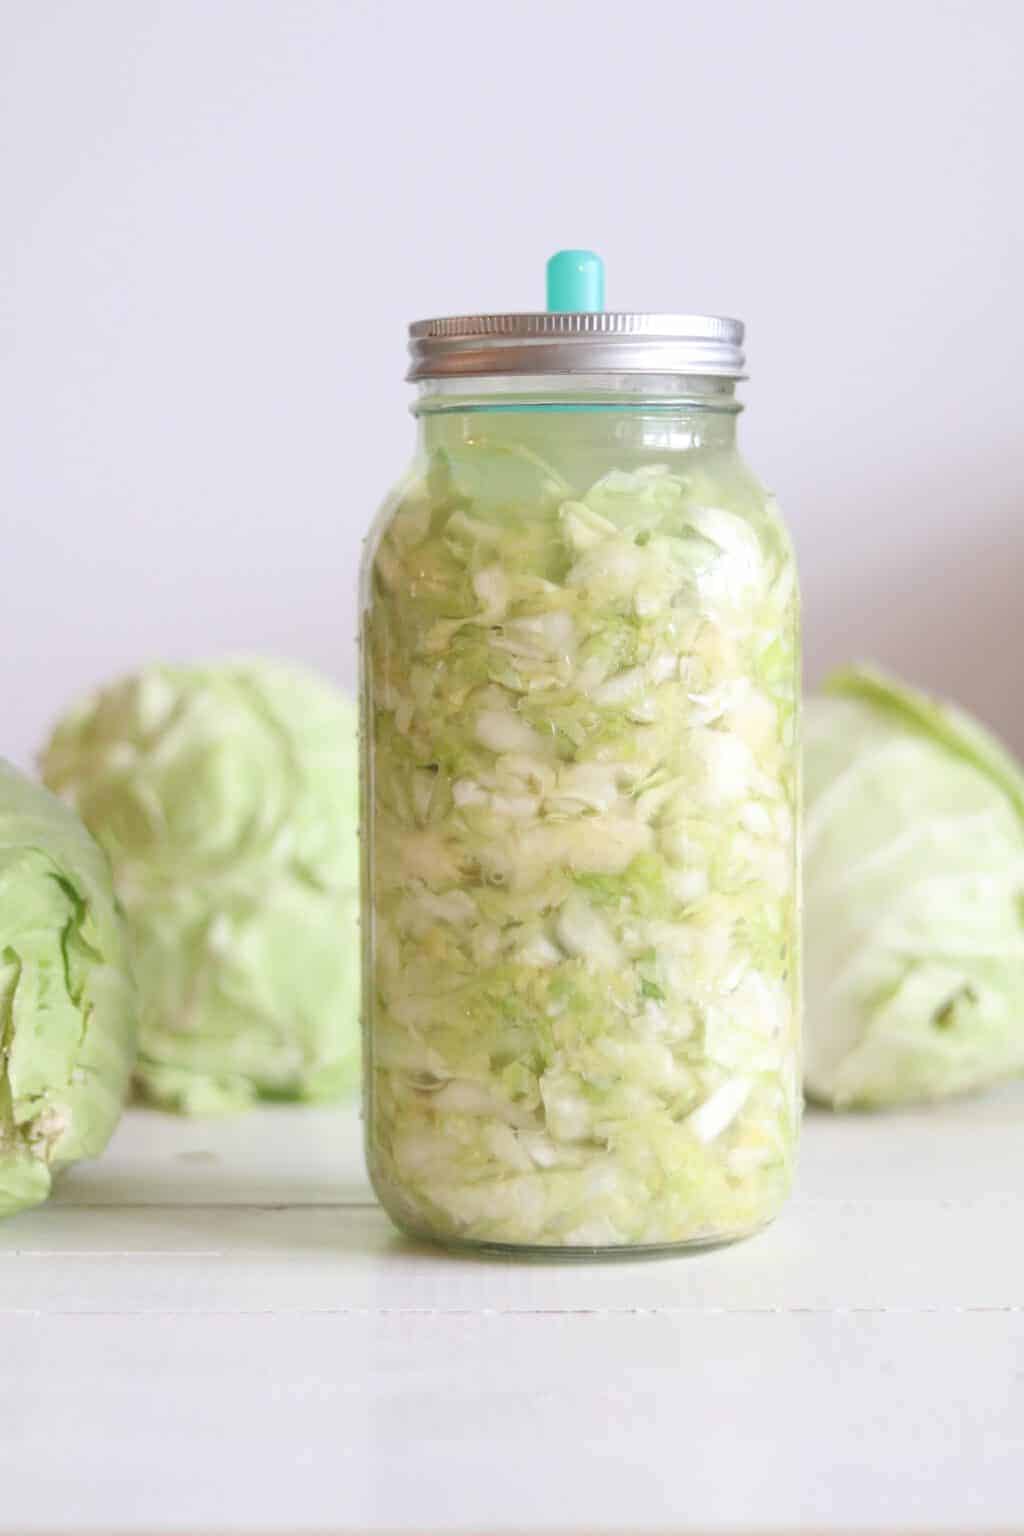 Fermented sauerkraut in mason jar on table with cabbages in background.